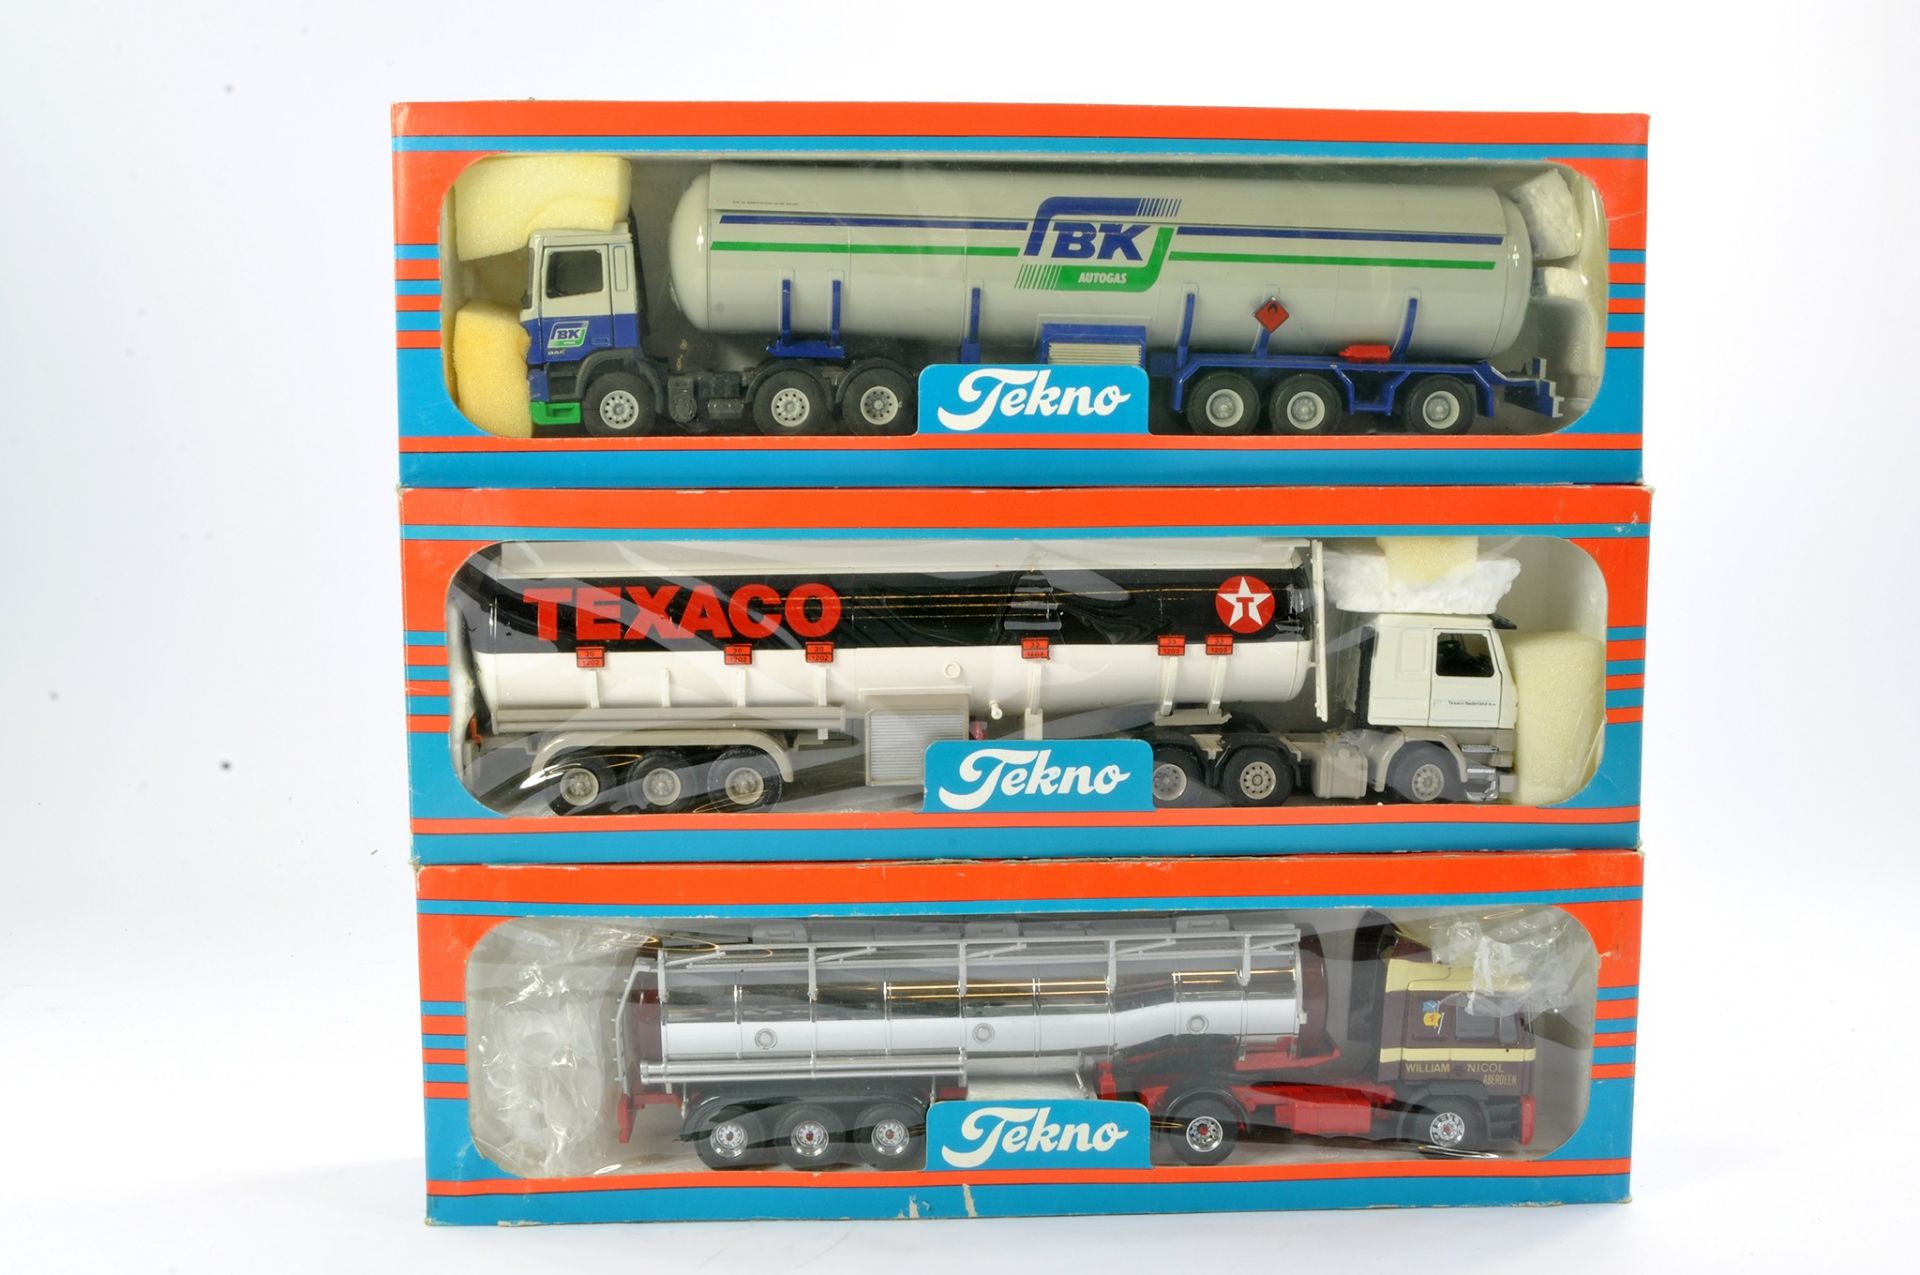 Tekno 1/50 Model Truck issues comprising 1) DAF Tanker in livery of BK Autogas, 2) Scania Tanker